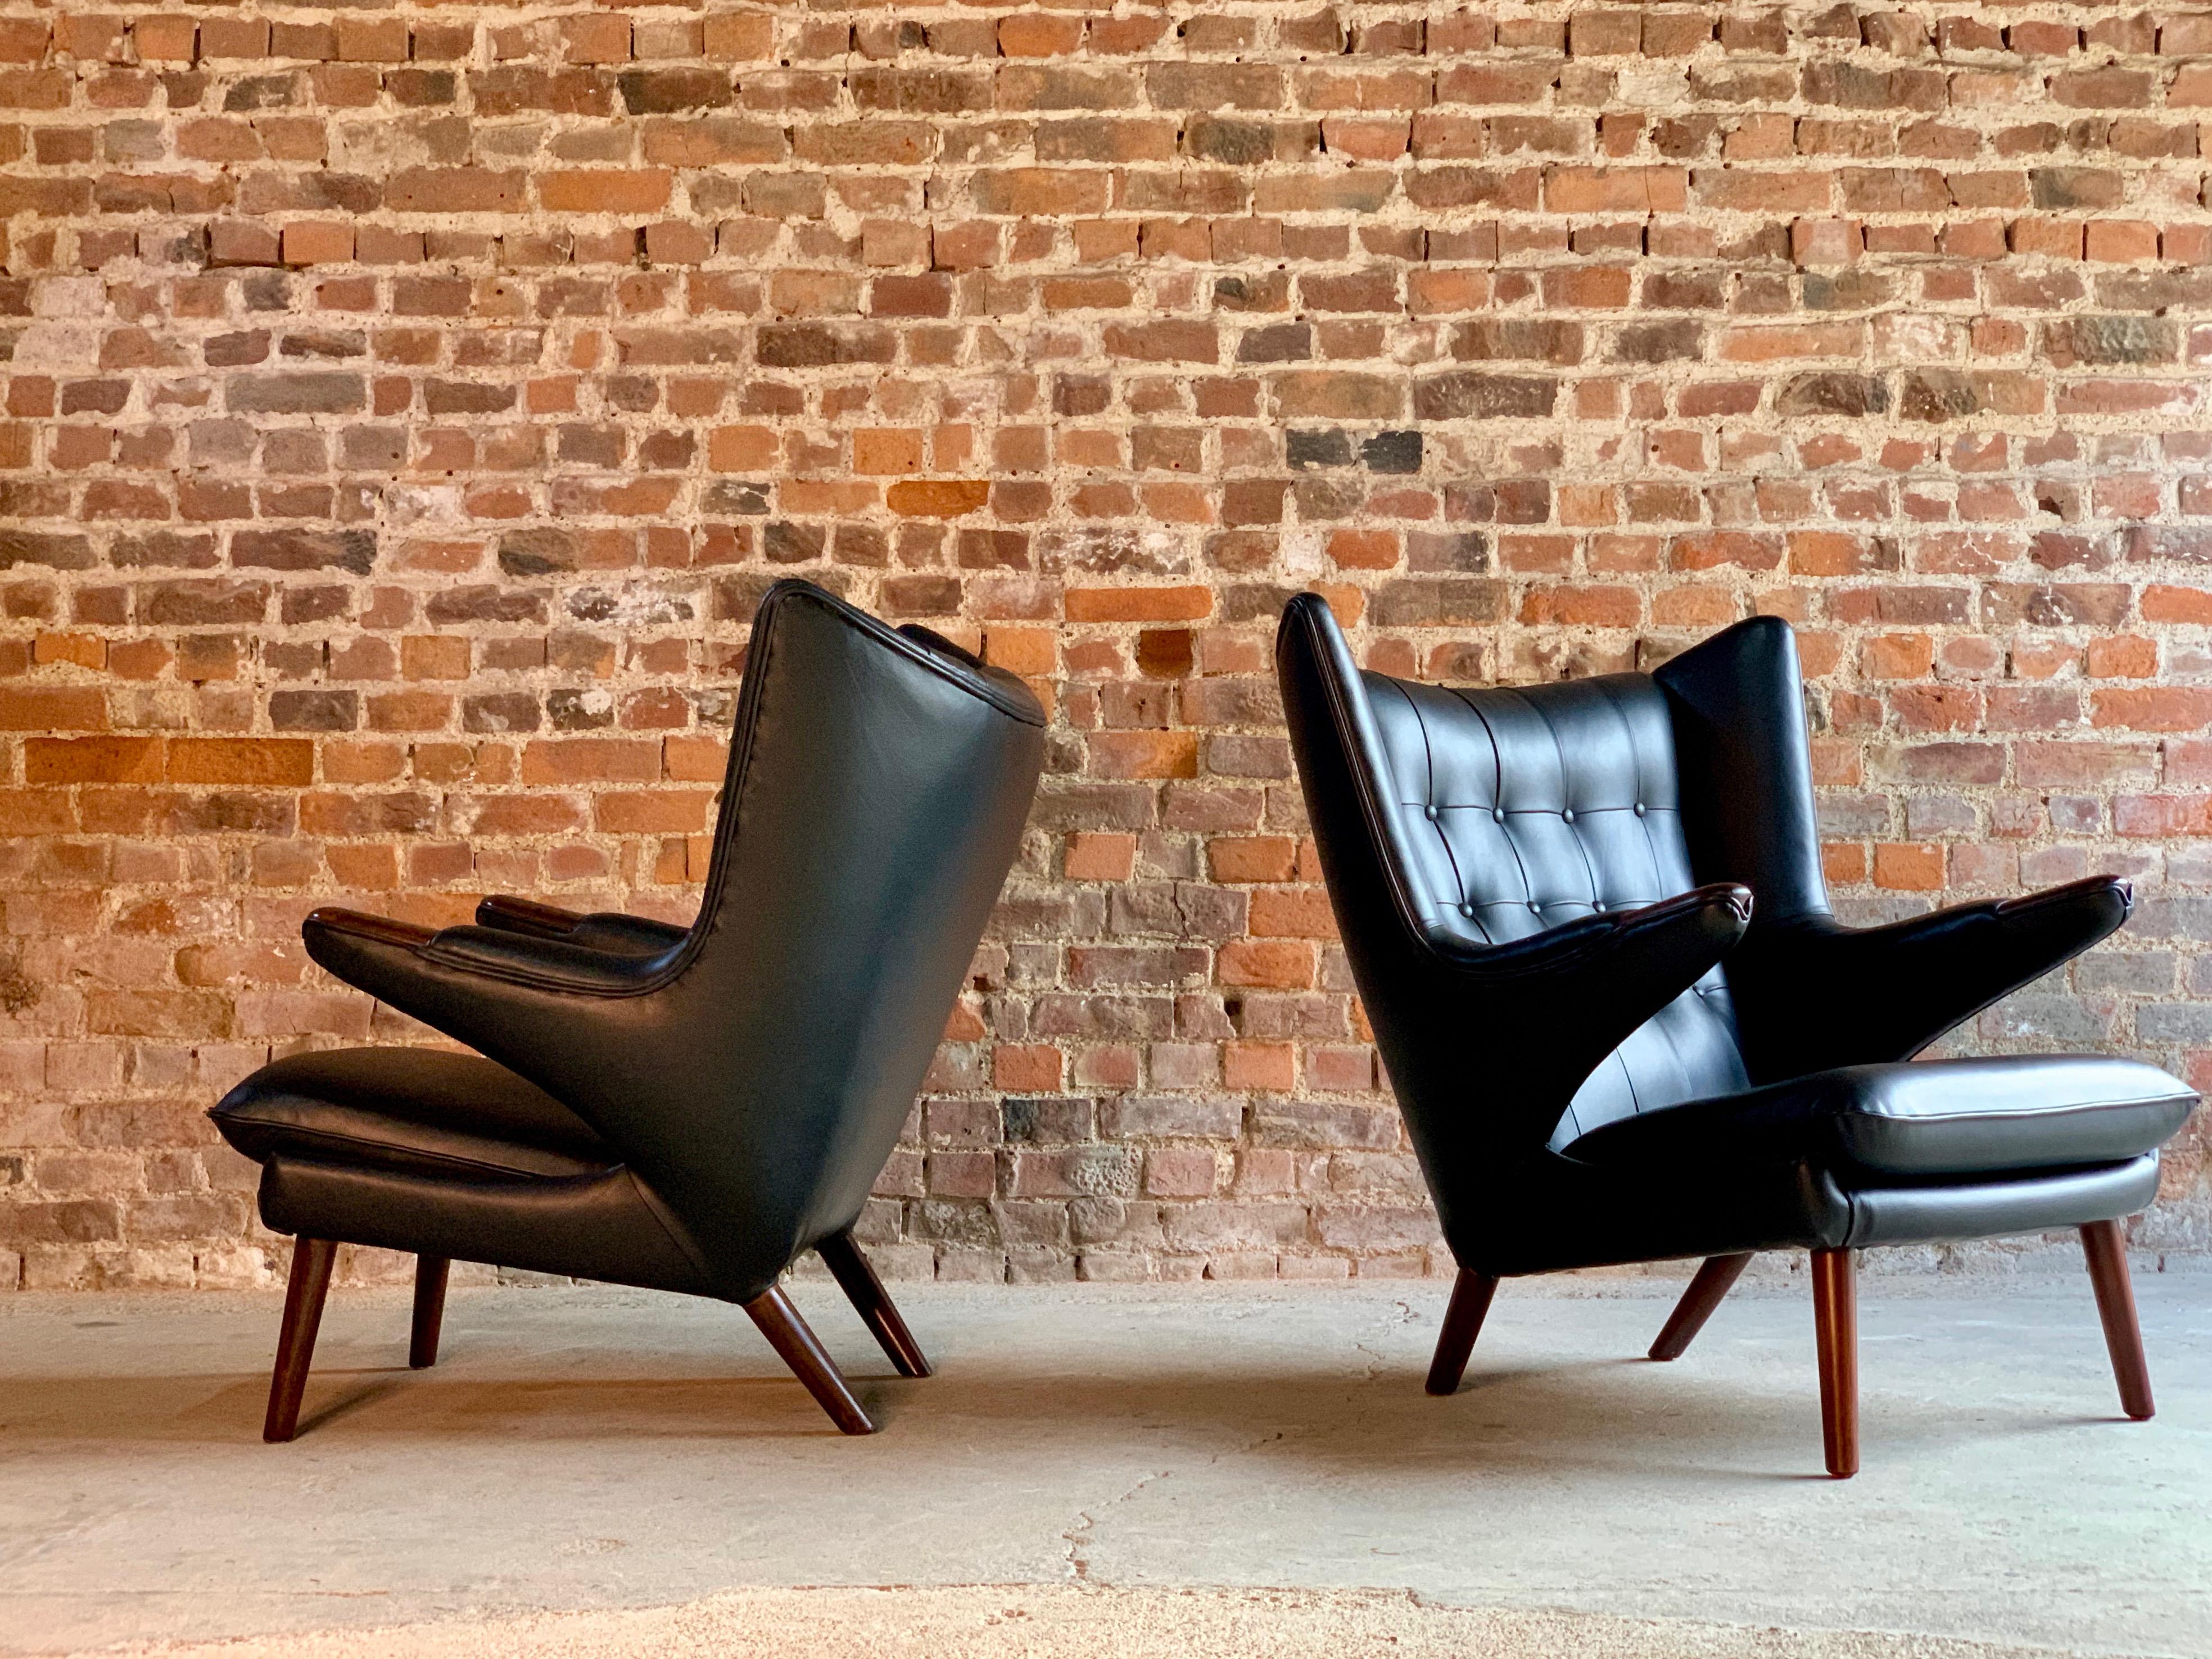 Pair of Hans Wegner papa bear lounge chairs black leather & Afromosia Model AP19, Denmark, 1963

?Hans J Wegner black leather 'Papa Bear' chair Model AP19, Denmark, 1963, otherwise known as a 'Bamsestol', designed in 1951, this example dates to